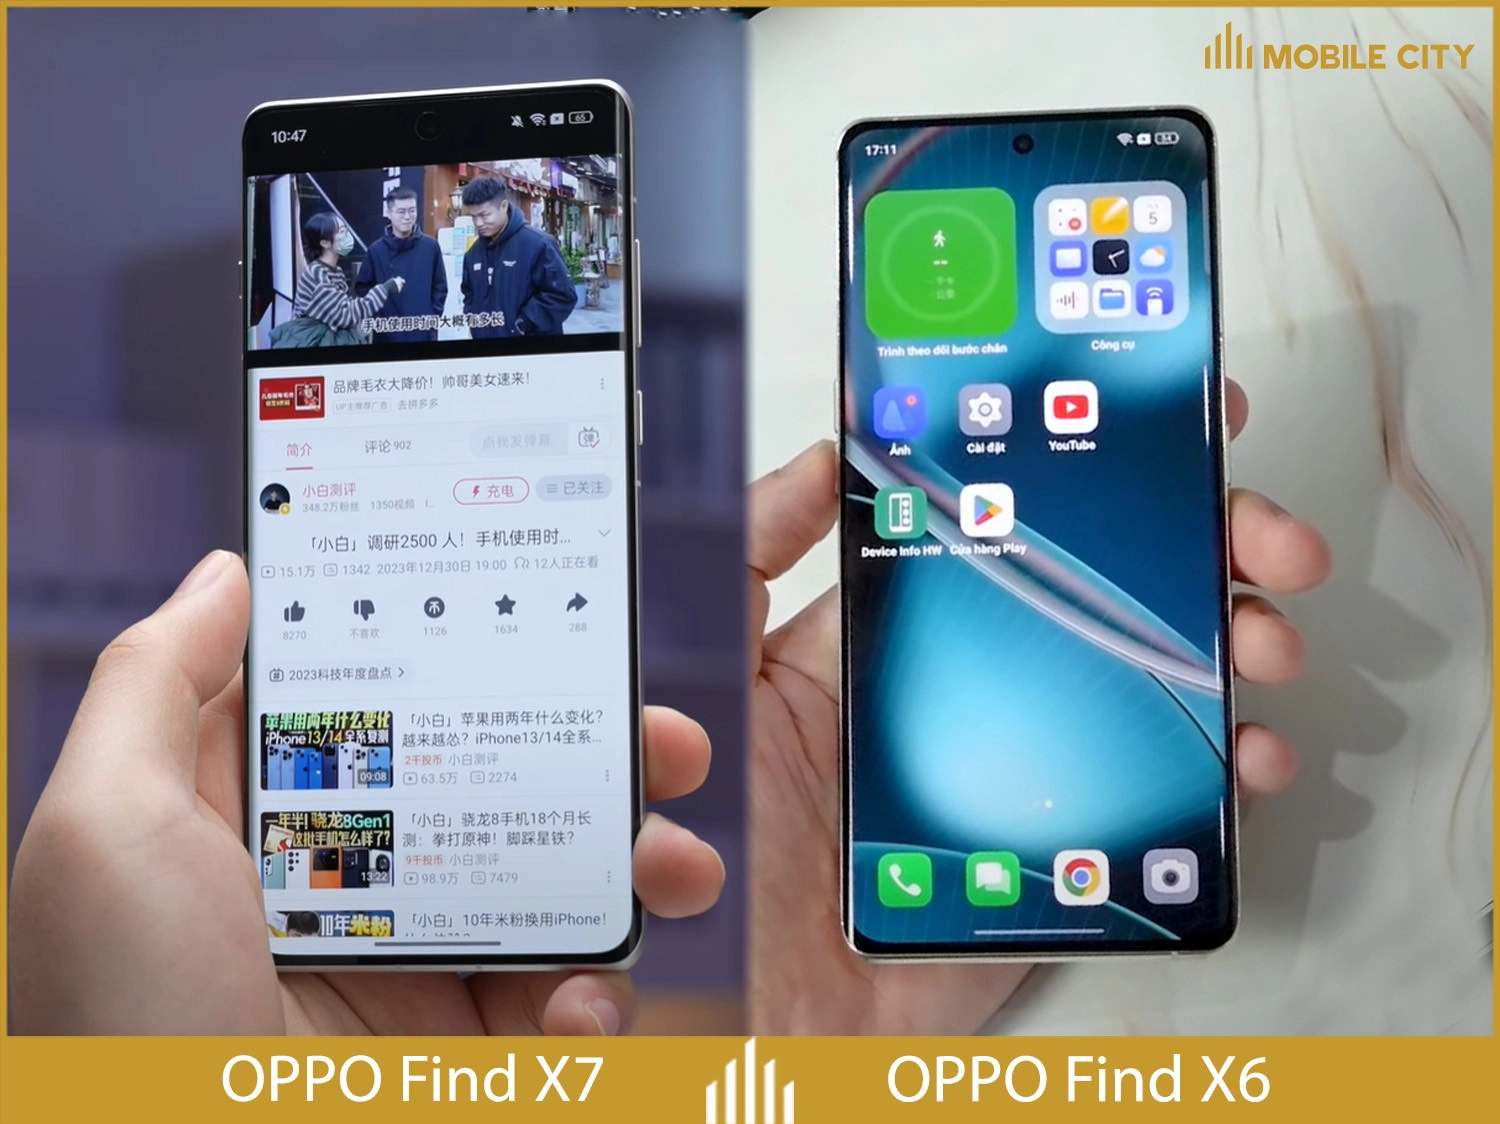 oppo-find-x7-so-sang-mat-truoc